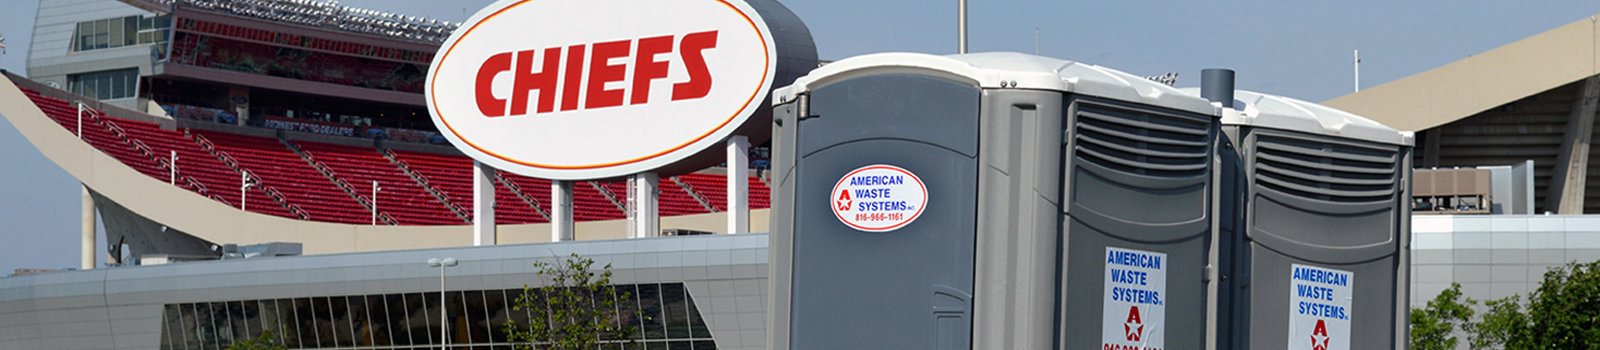 official portable toilet providers of Kansas City Chiefs